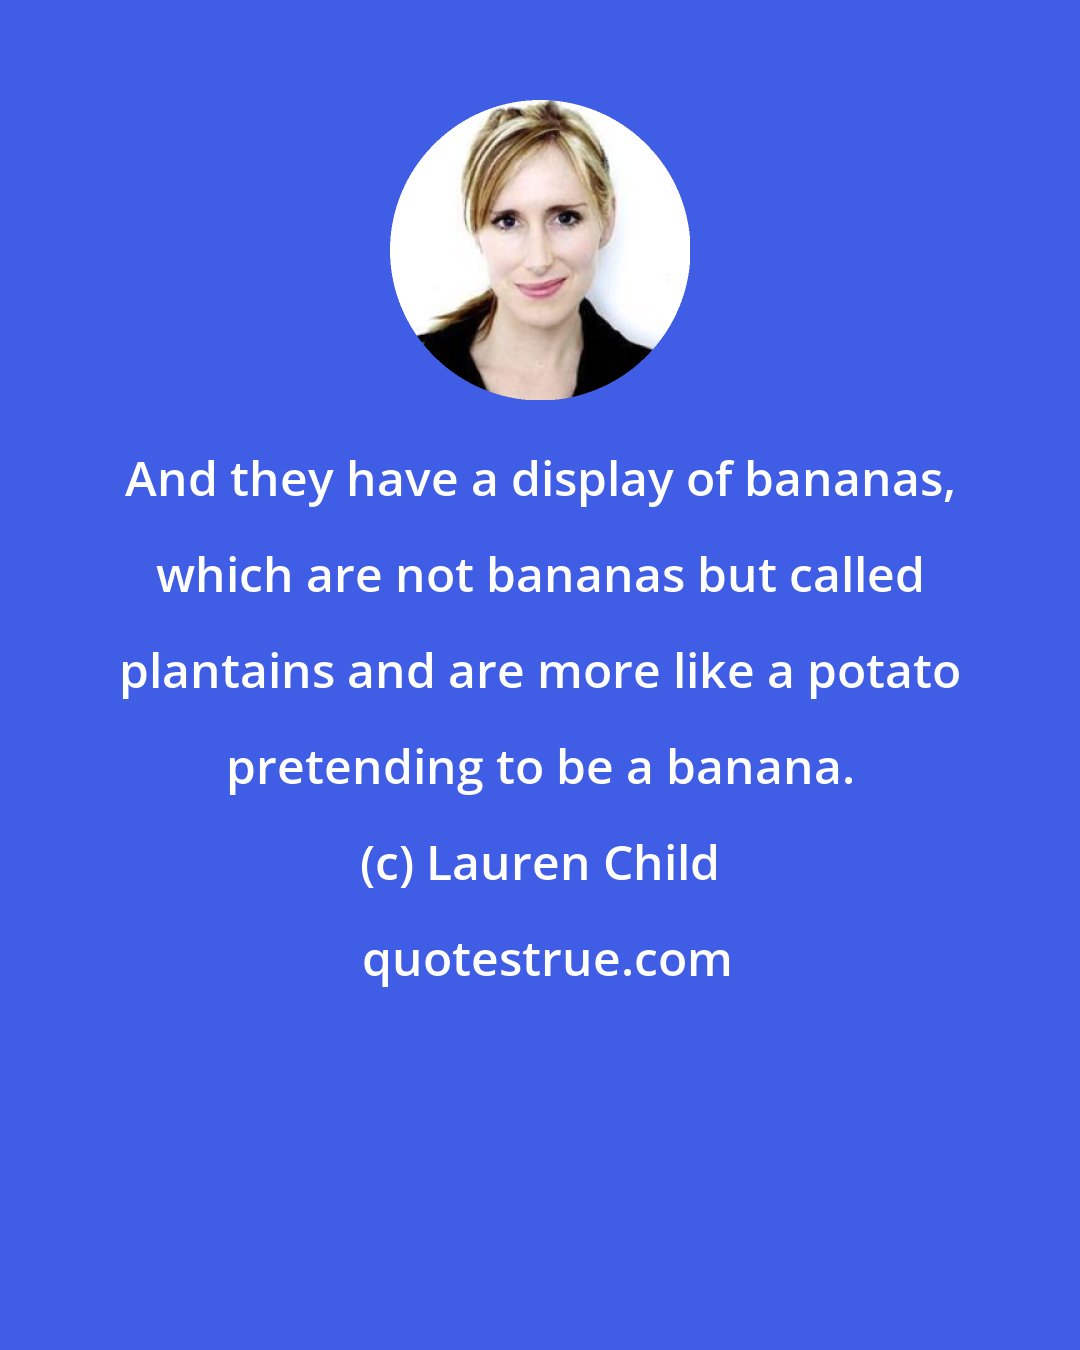 Lauren Child: And they have a display of bananas, which are not bananas but called plantains and are more like a potato pretending to be a banana.